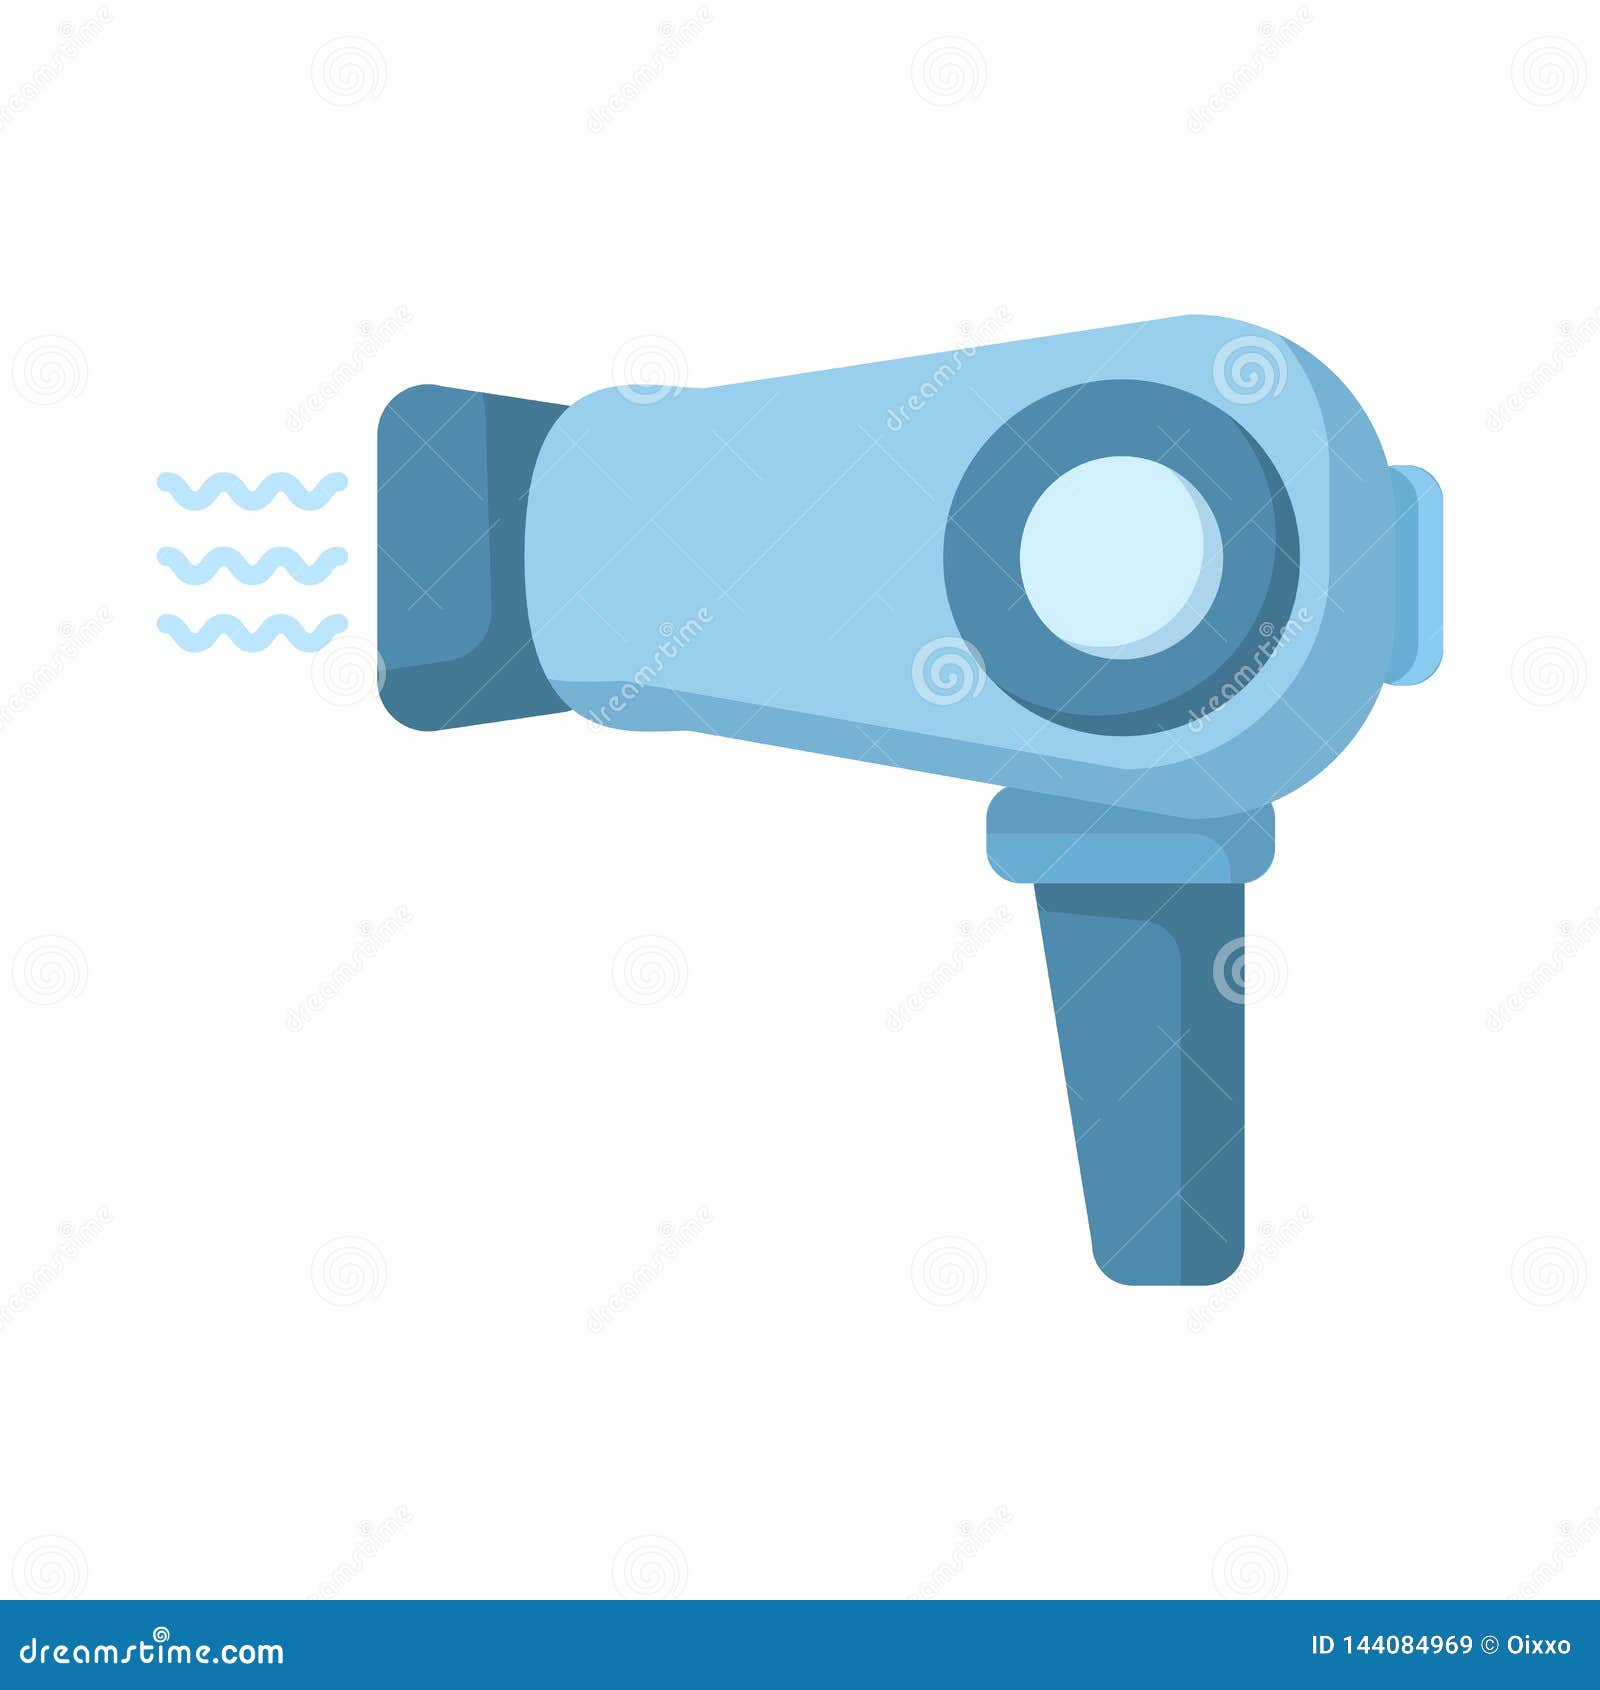 hairdryer flat icon.  colorful  illlustration